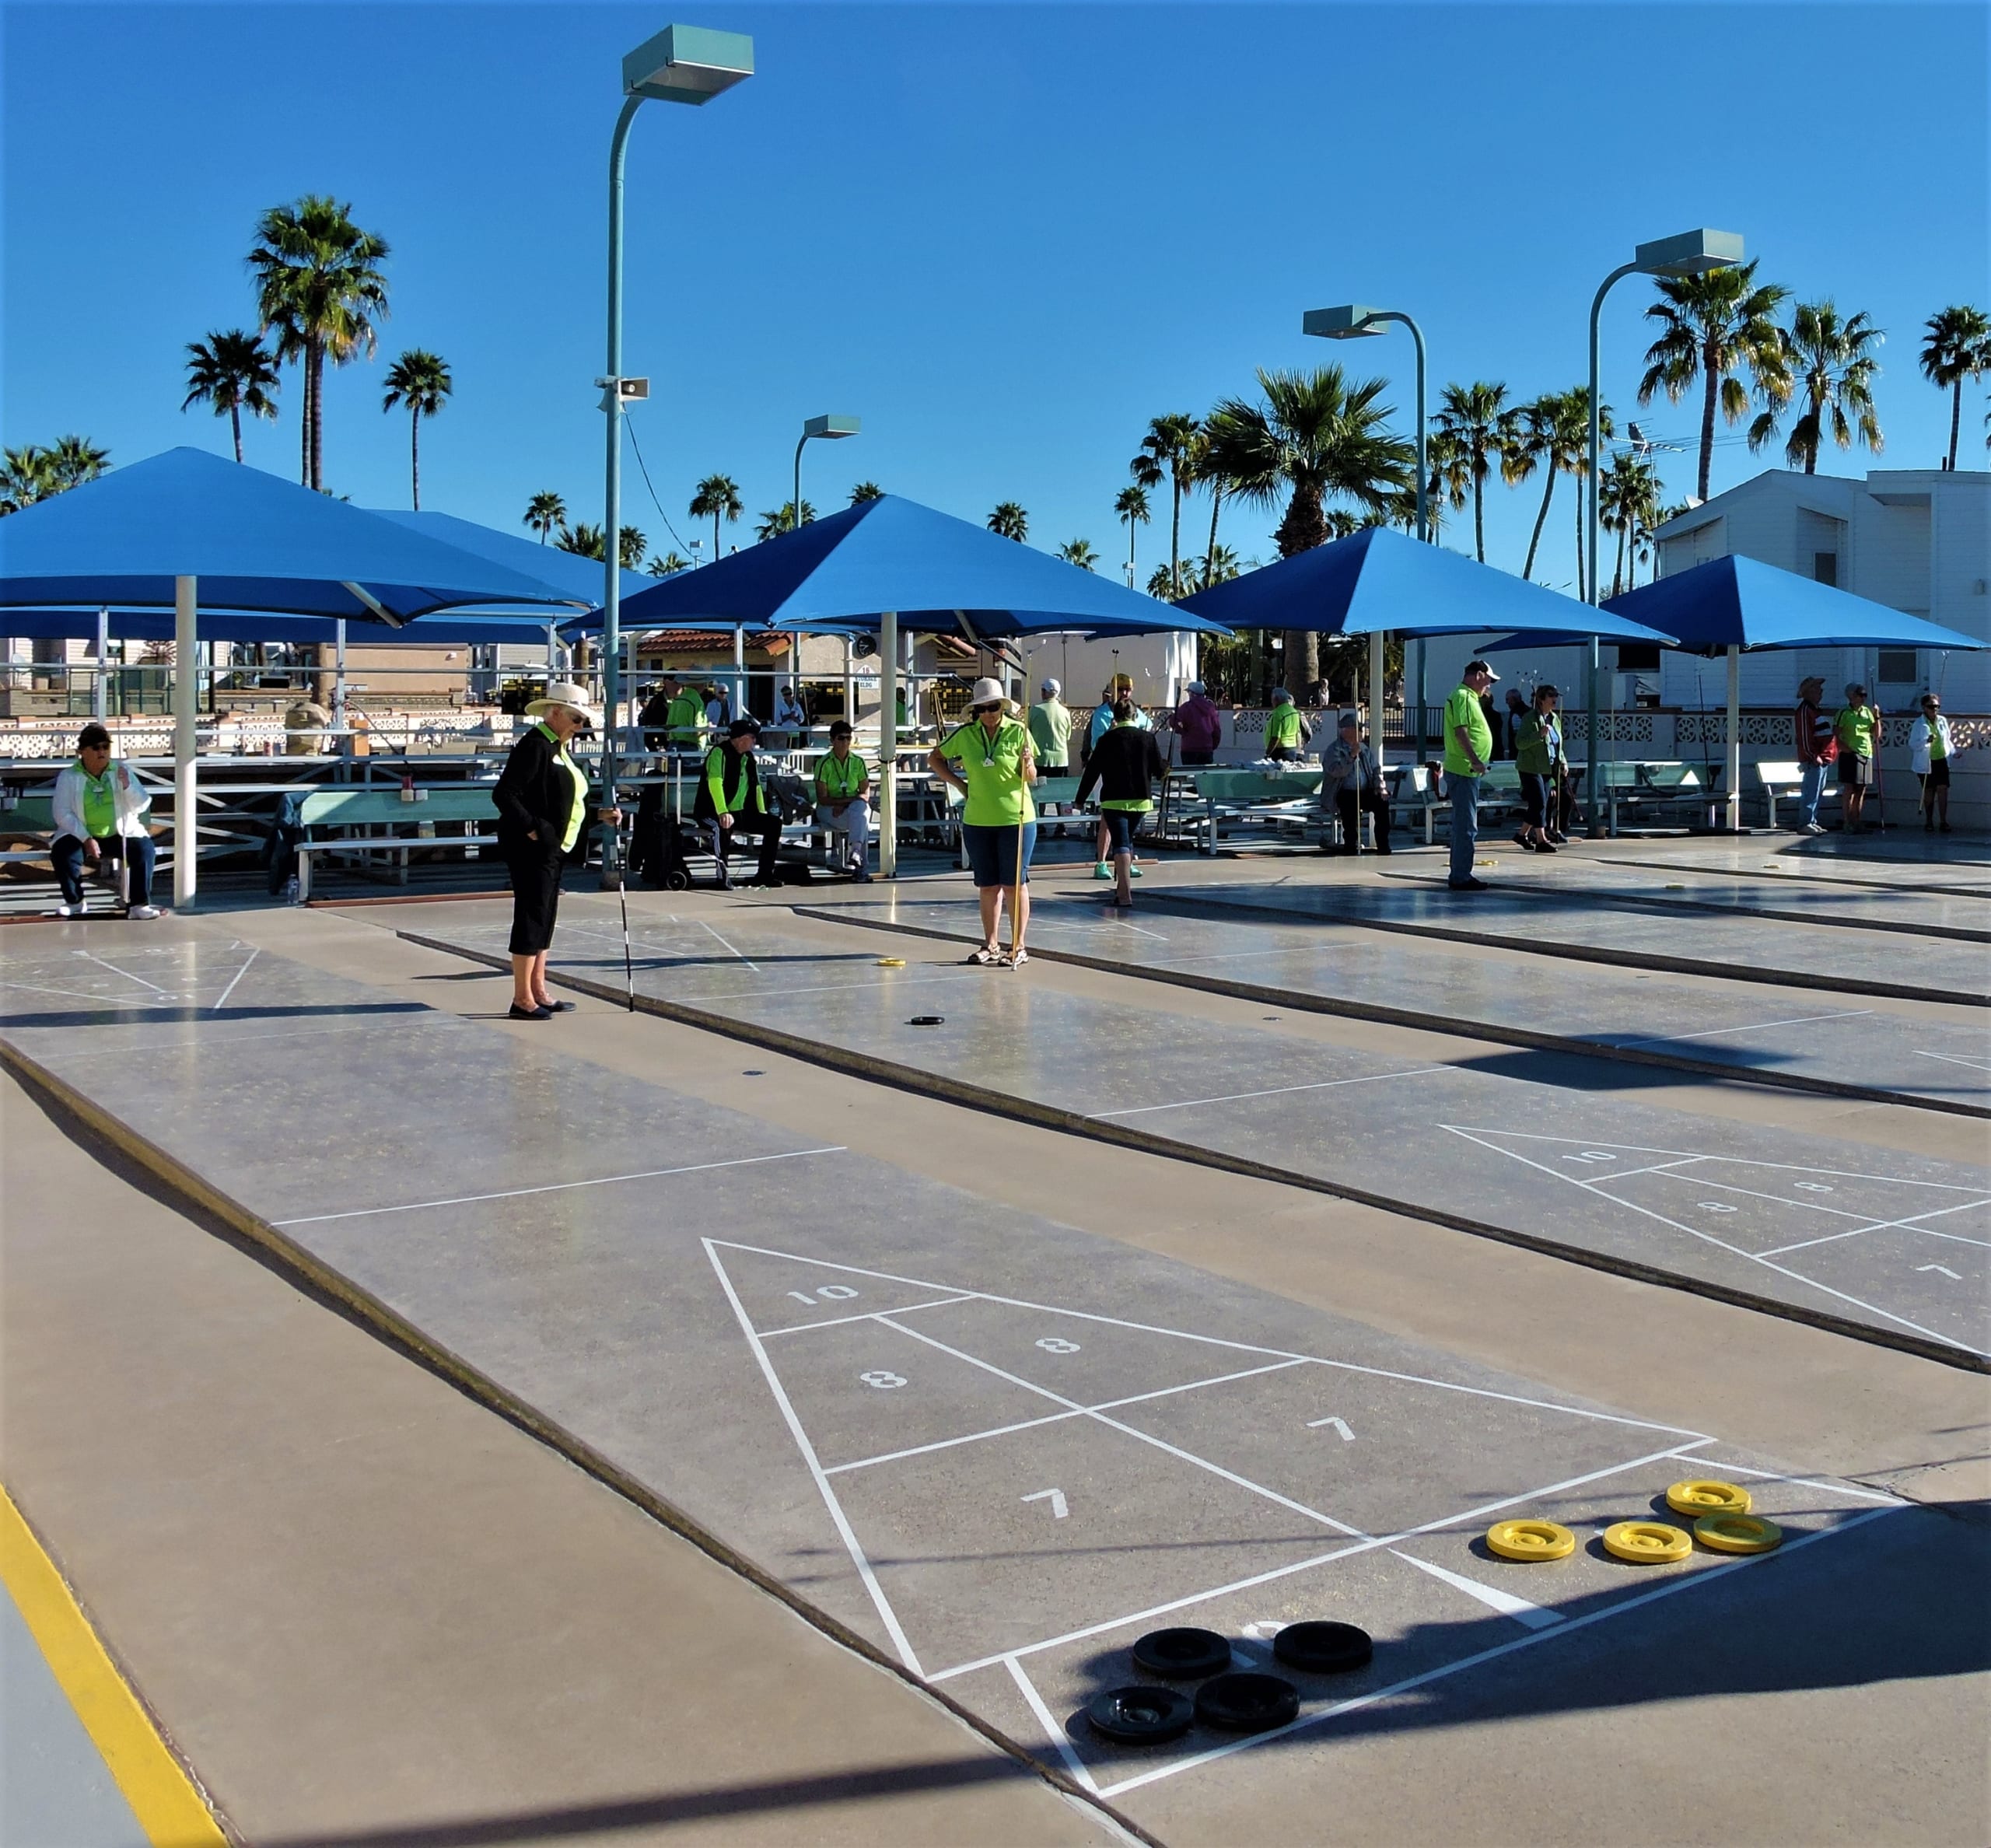 Shuffle Board - Clubs, Groups and More!